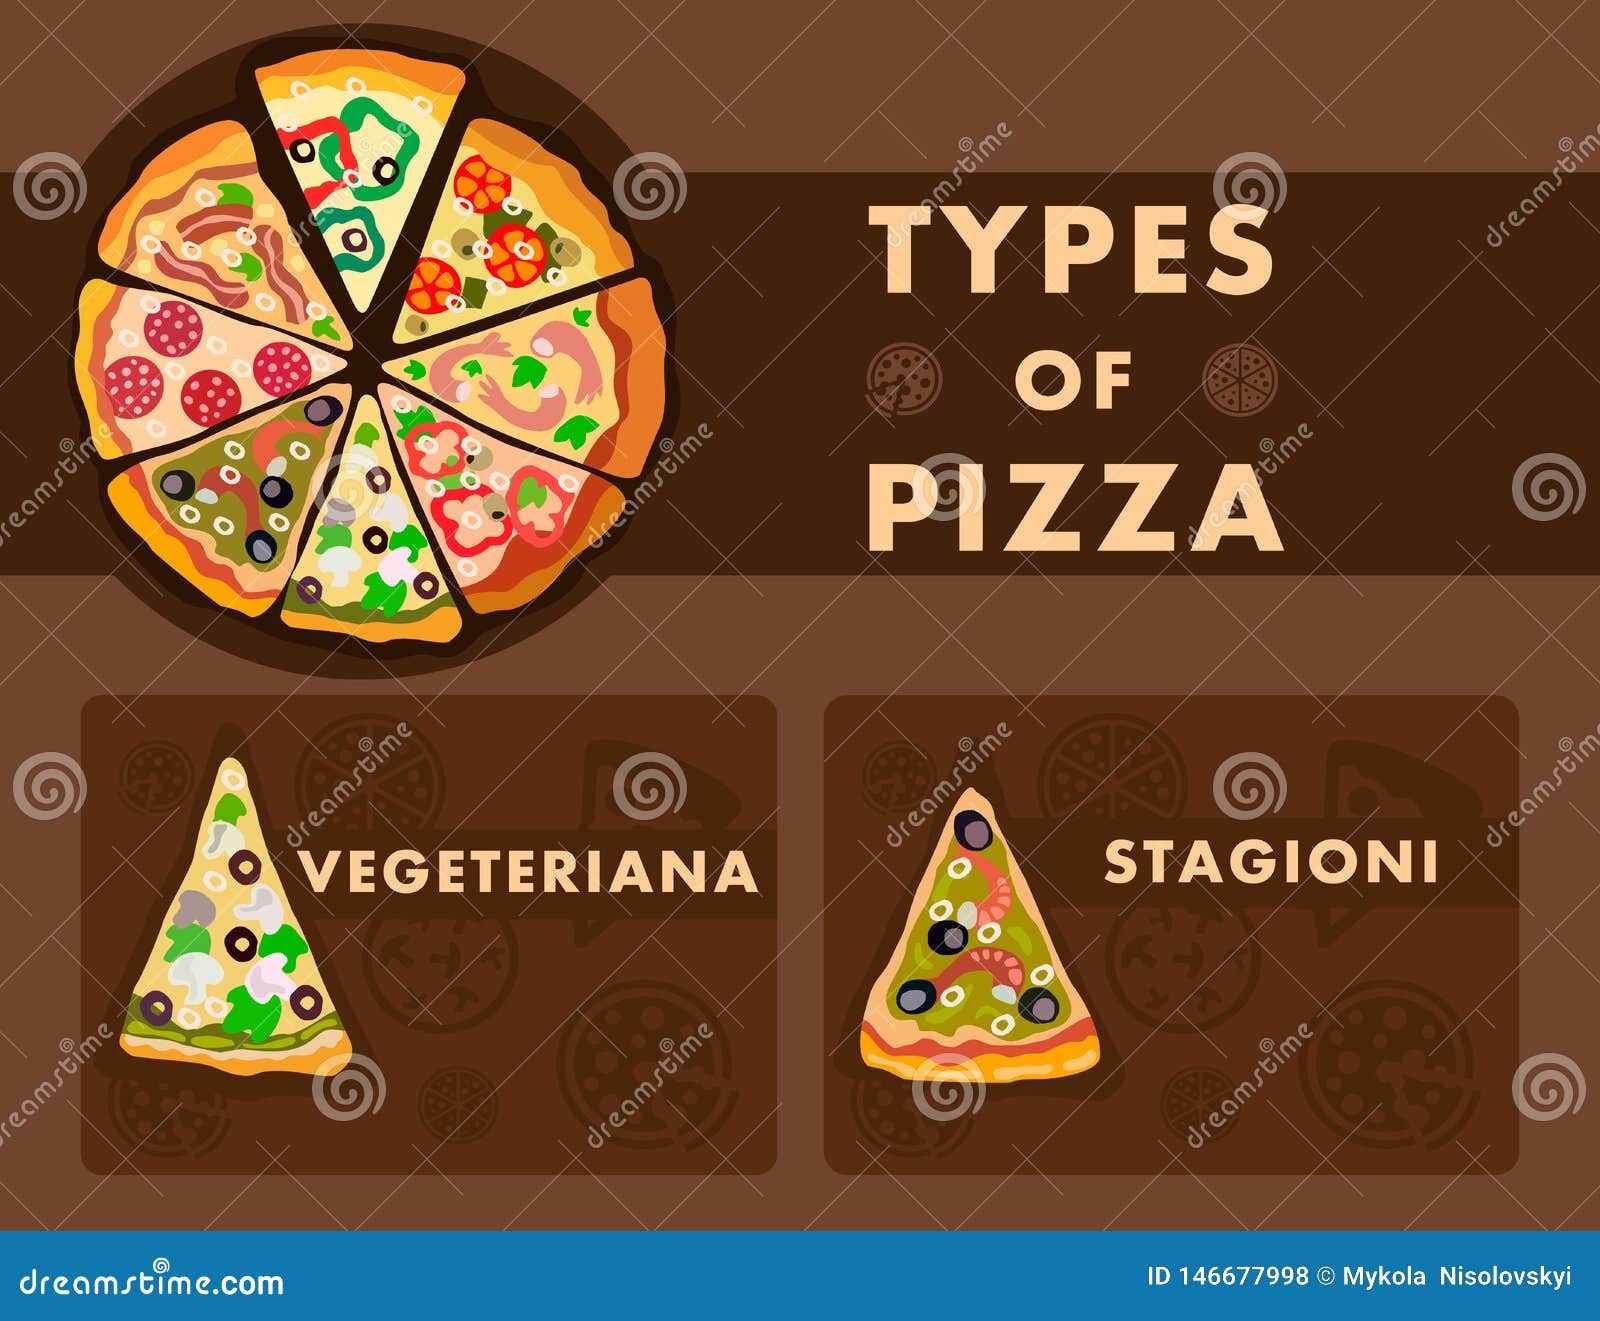 different pizza types poster cartoon template